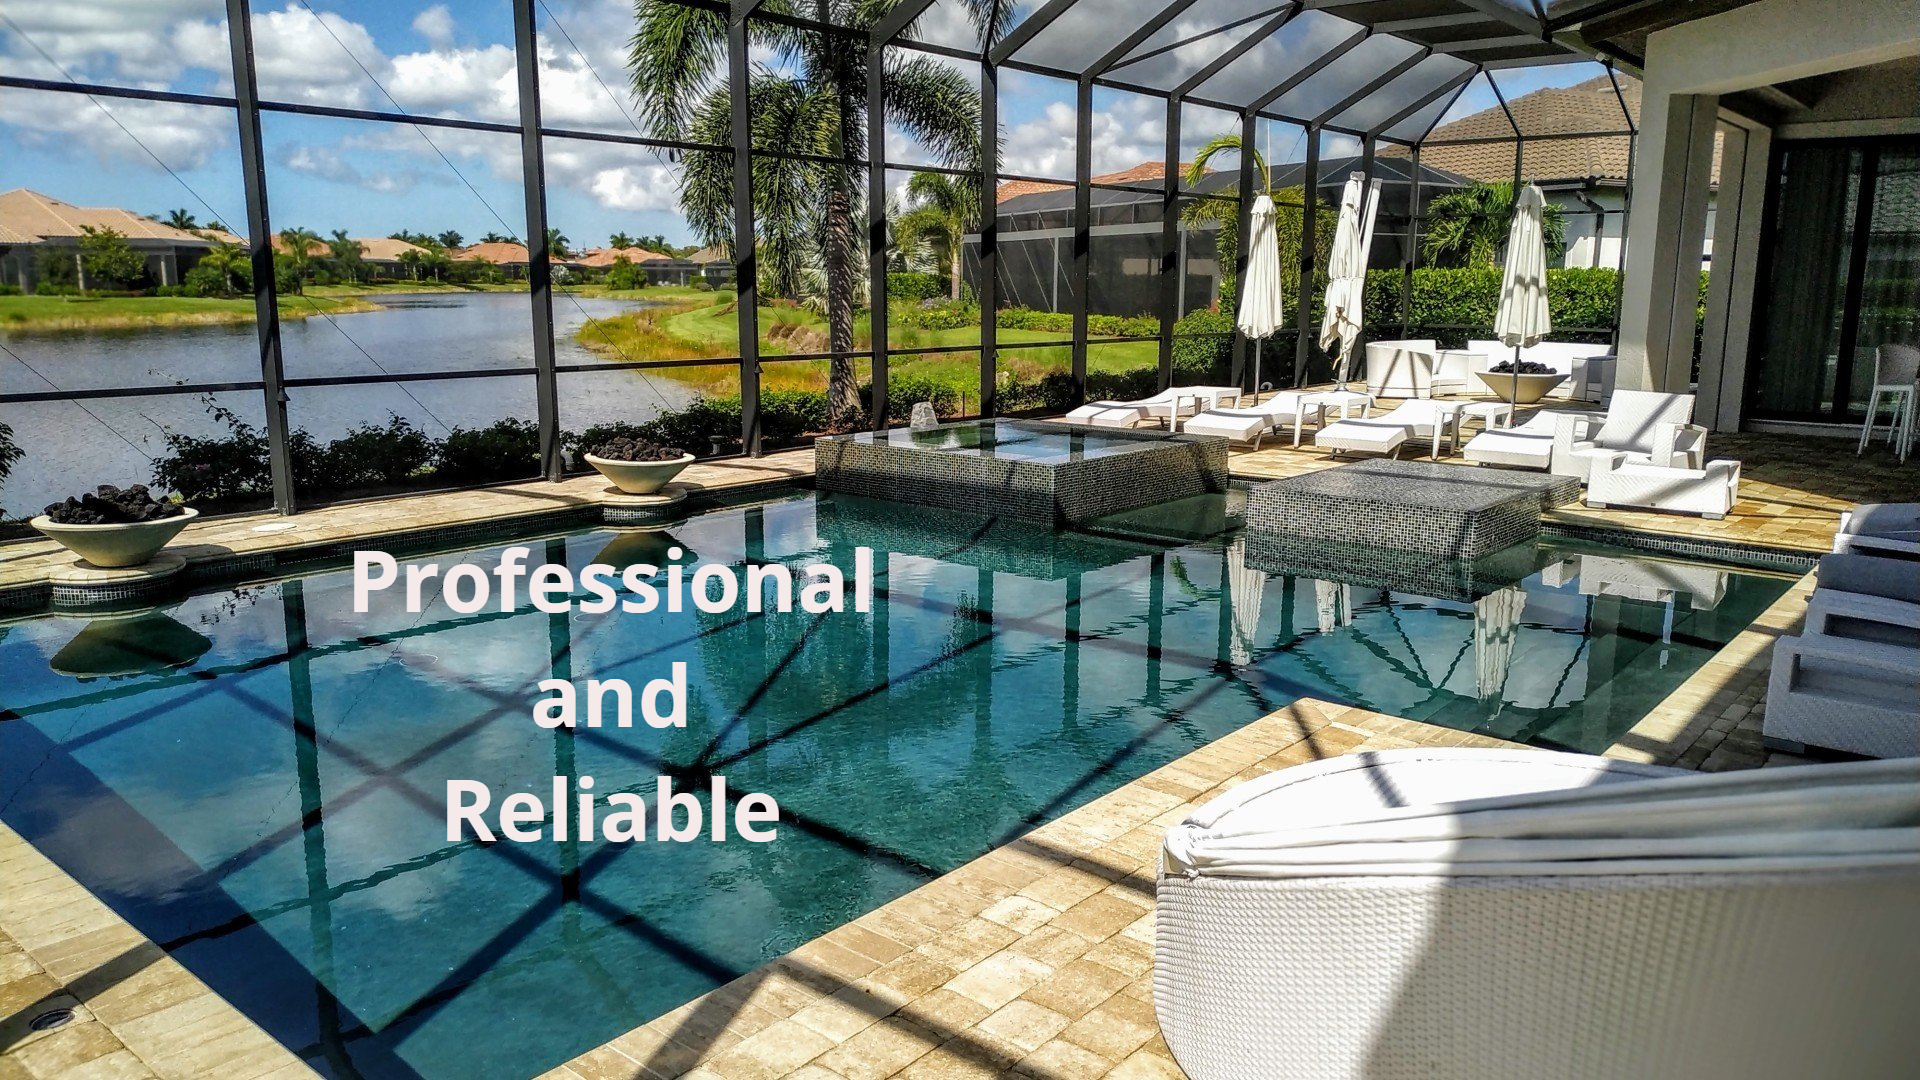 Pressure Washing near me; Naples, FL. Power washing services in Naples - Smart Pressure Cleaning